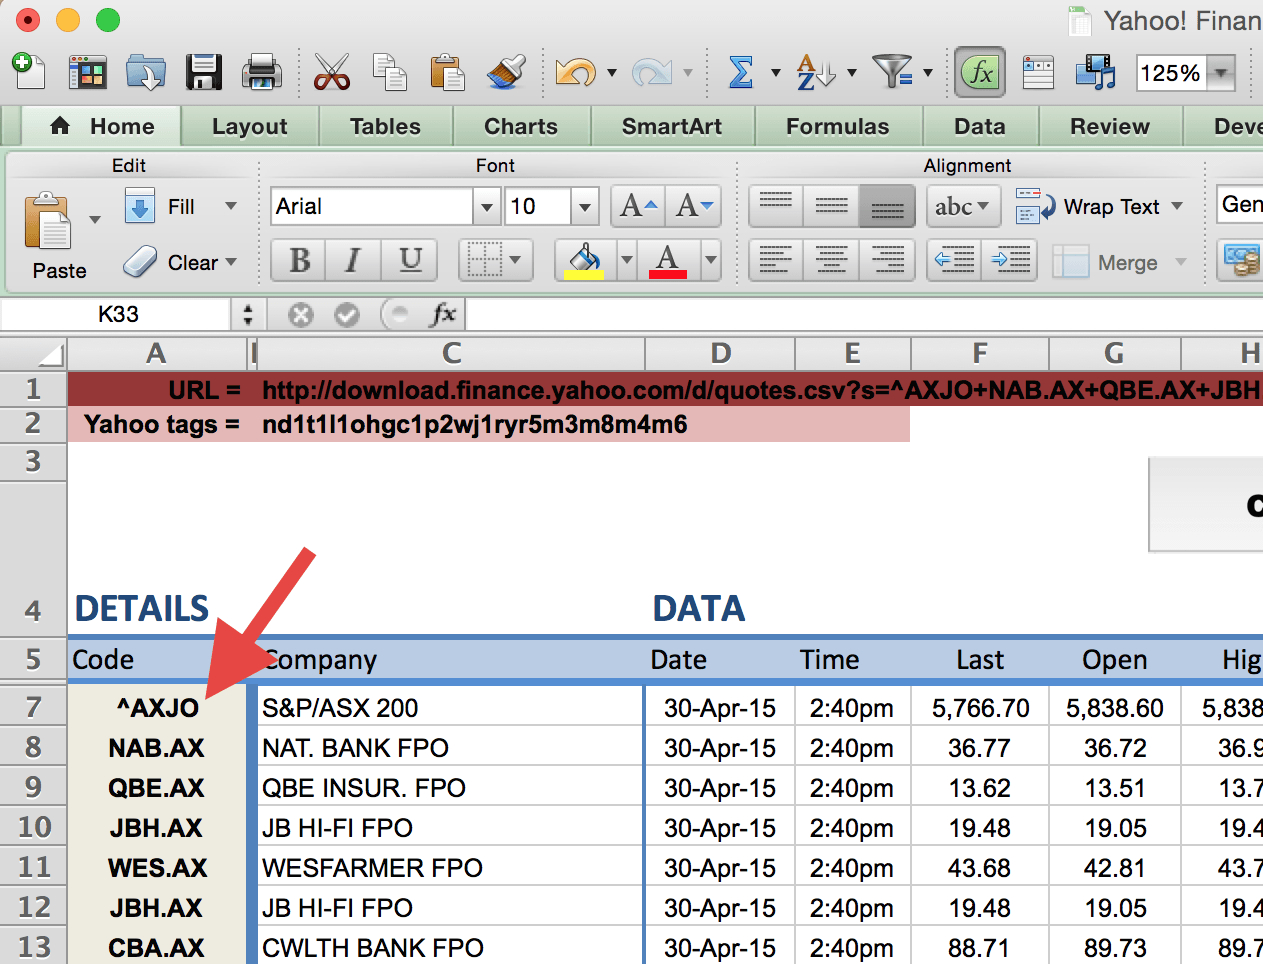 Spreadsheet Codes In How To Import Share Price Data Into Excel  Market Index